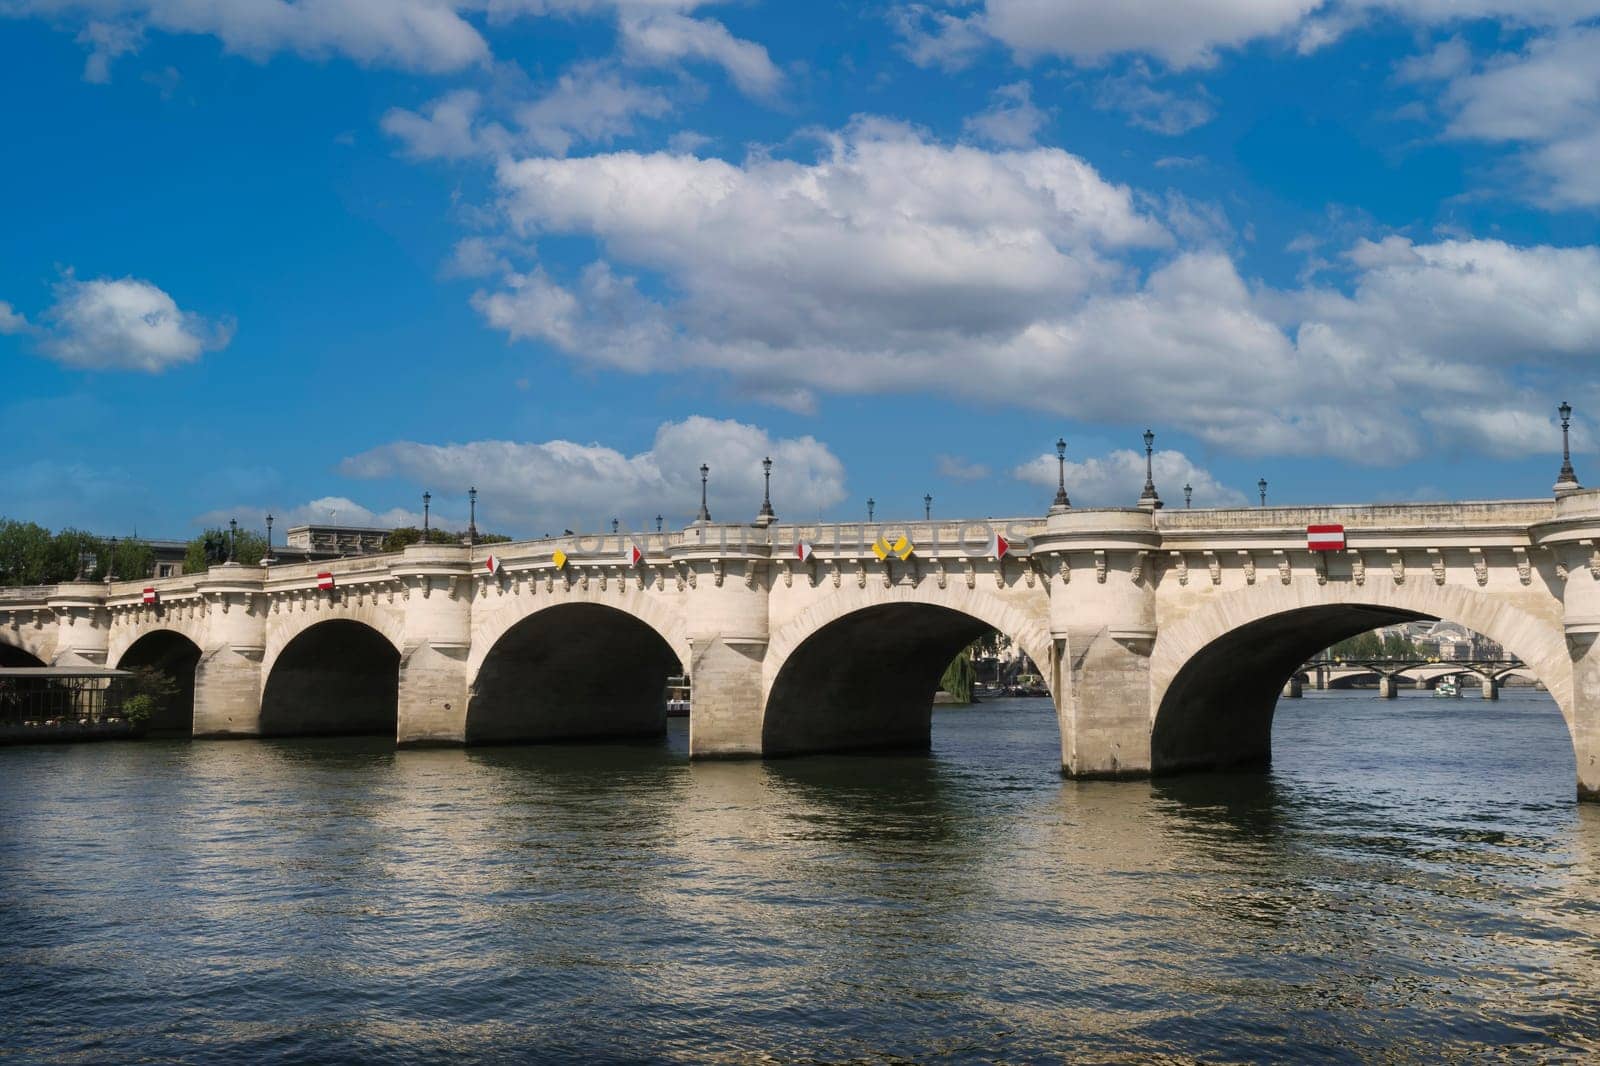 View of the Pont Neuf over the Seine river in Paris. It is the oldest bridge in the city.